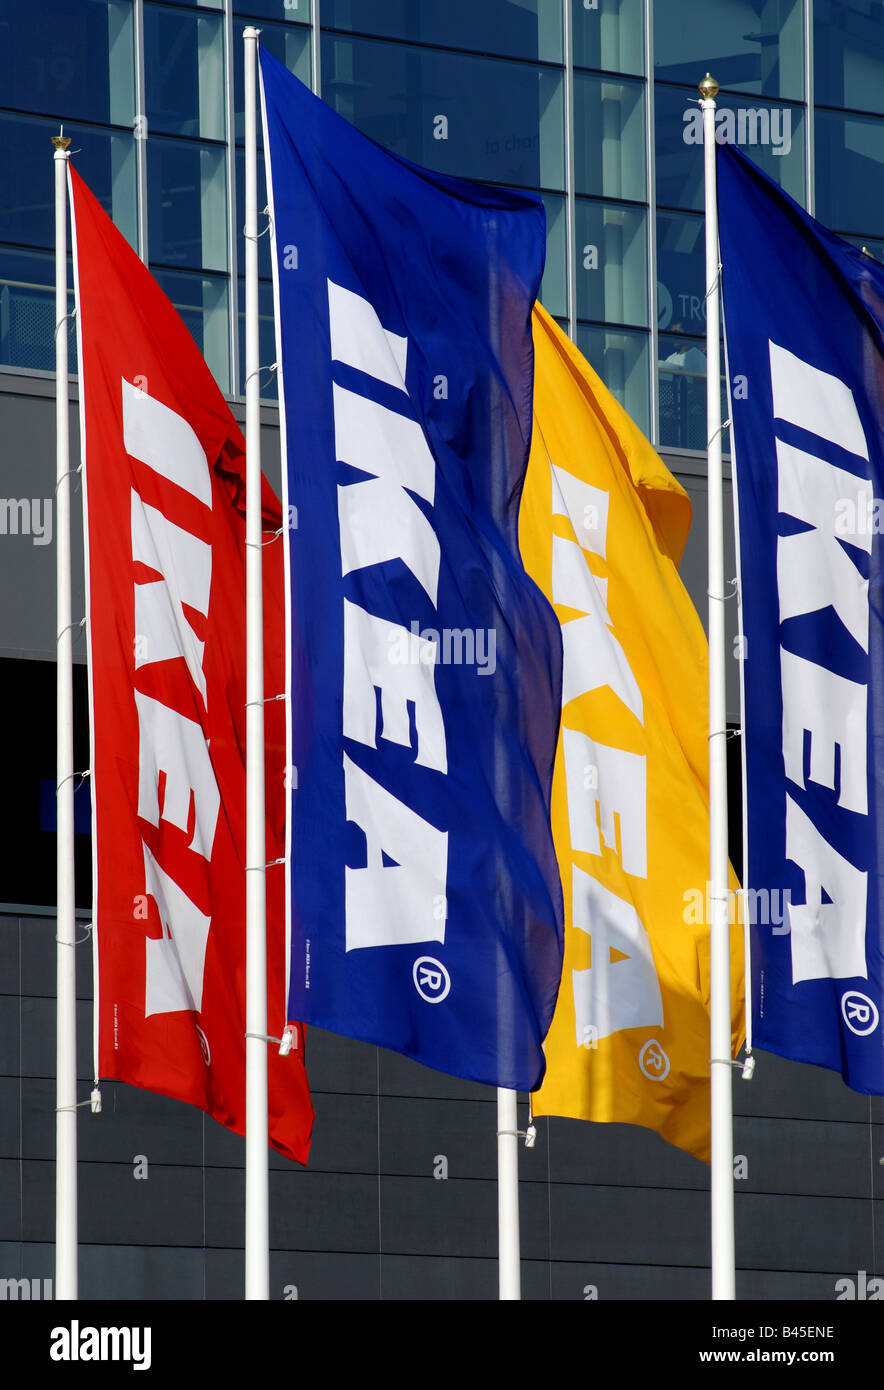 Flags at Coventry Ikea store West Midlands England UK Stock Photo